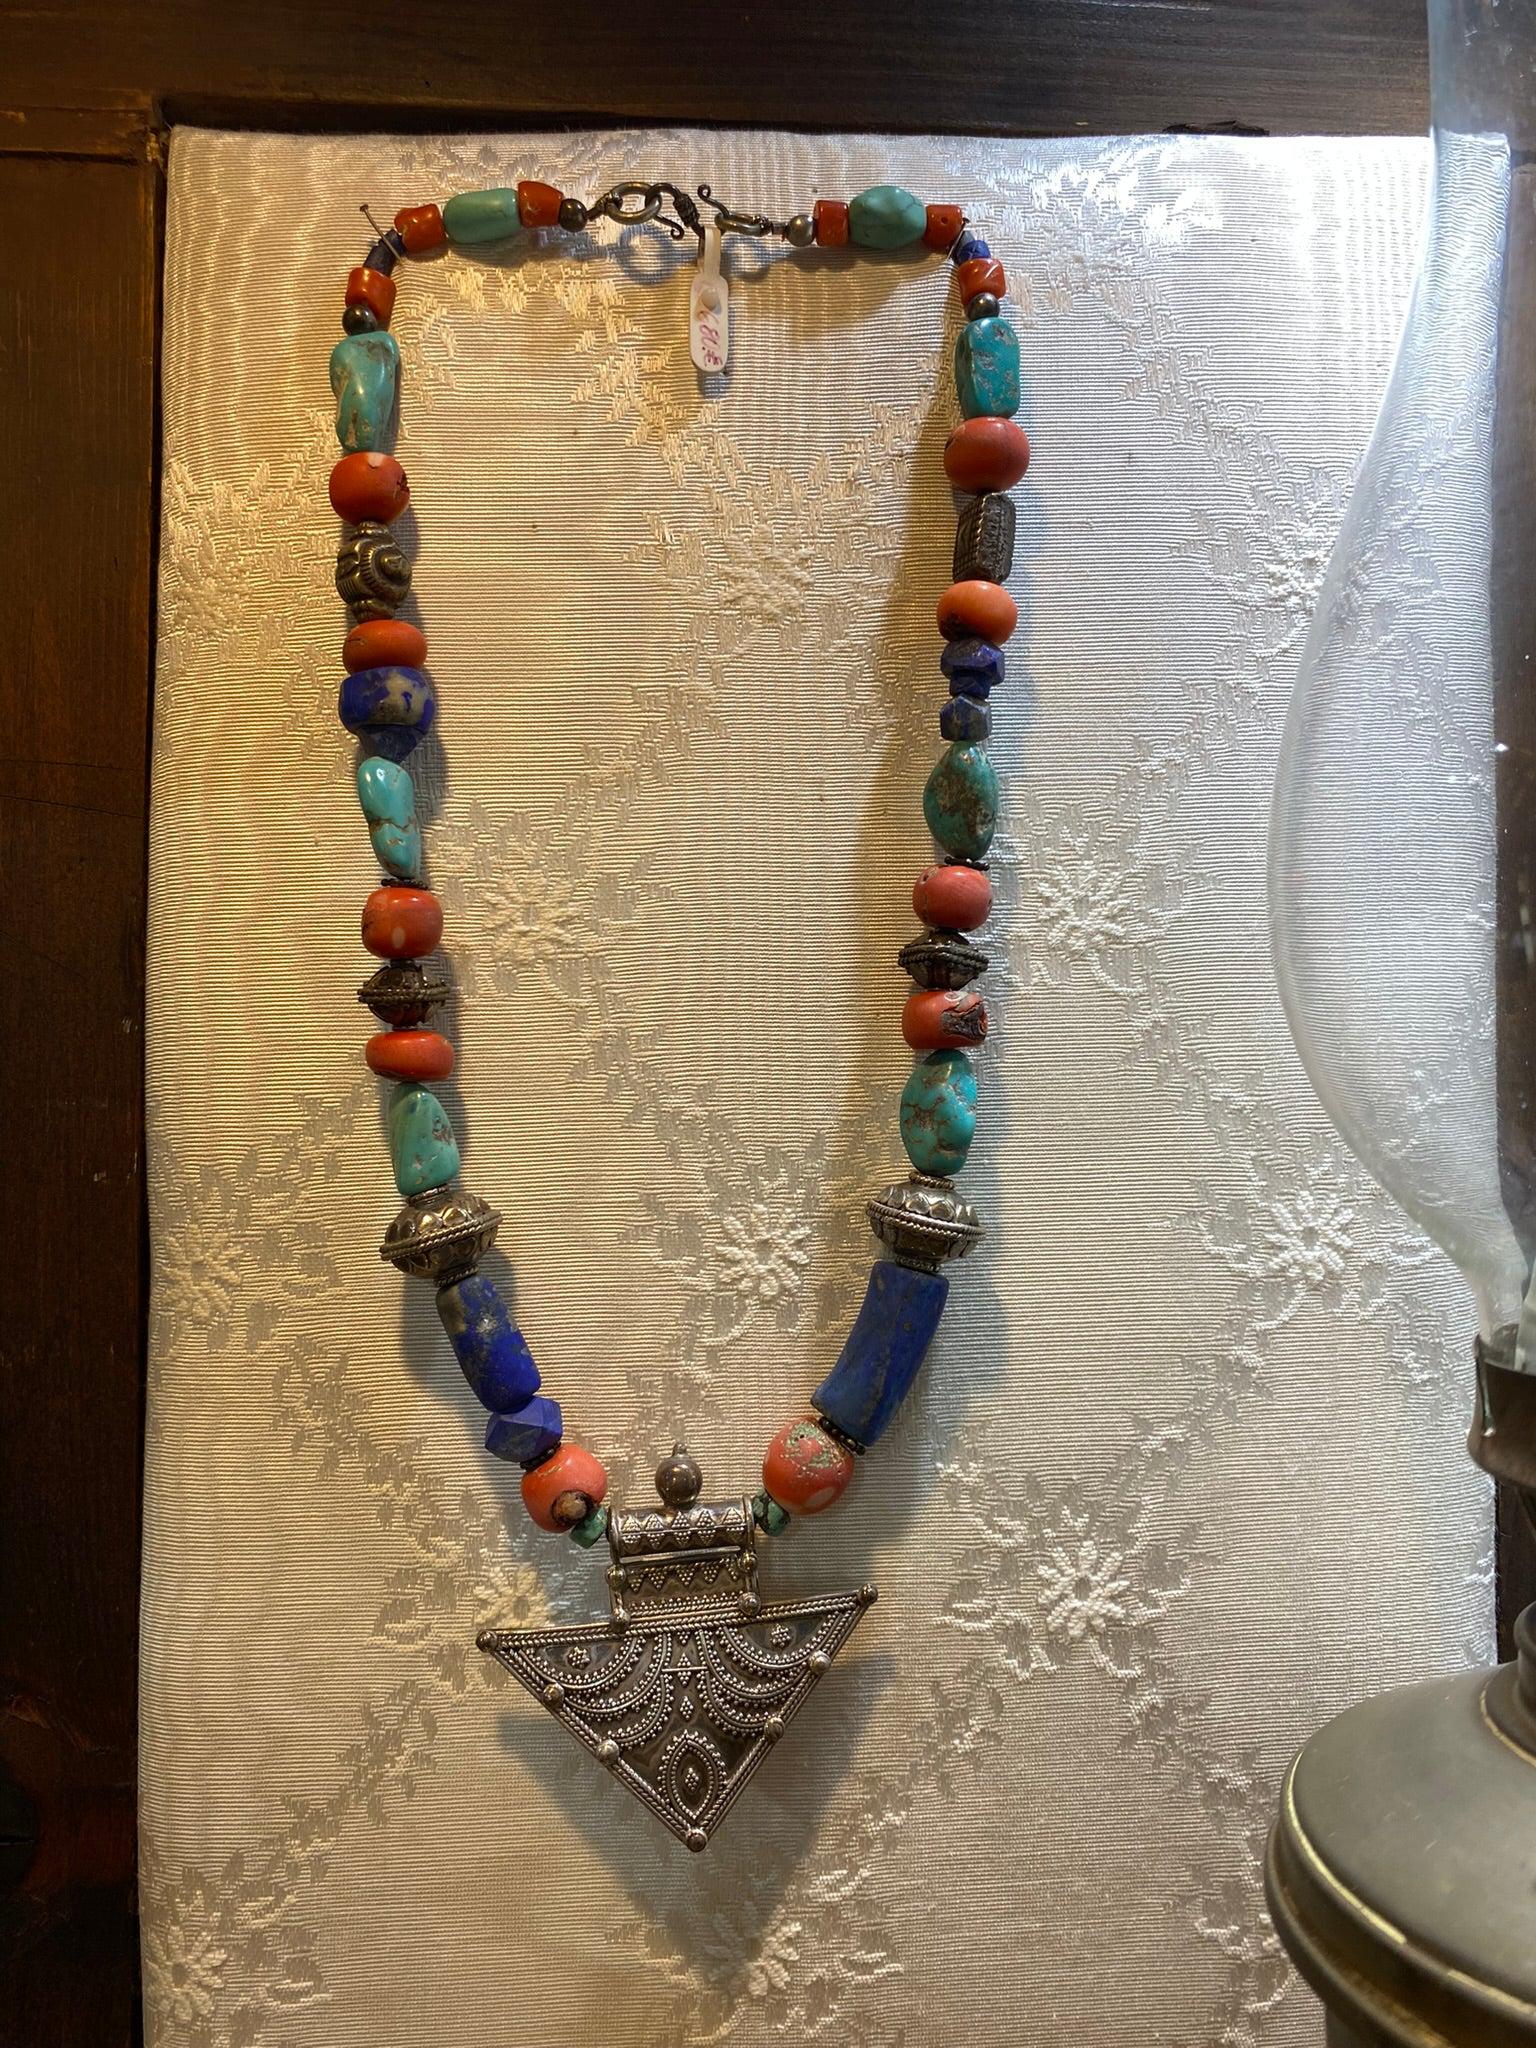 Necklace with Old Lapis Lazuli, Turquoise & Carnelian stone, with sterling silver elements